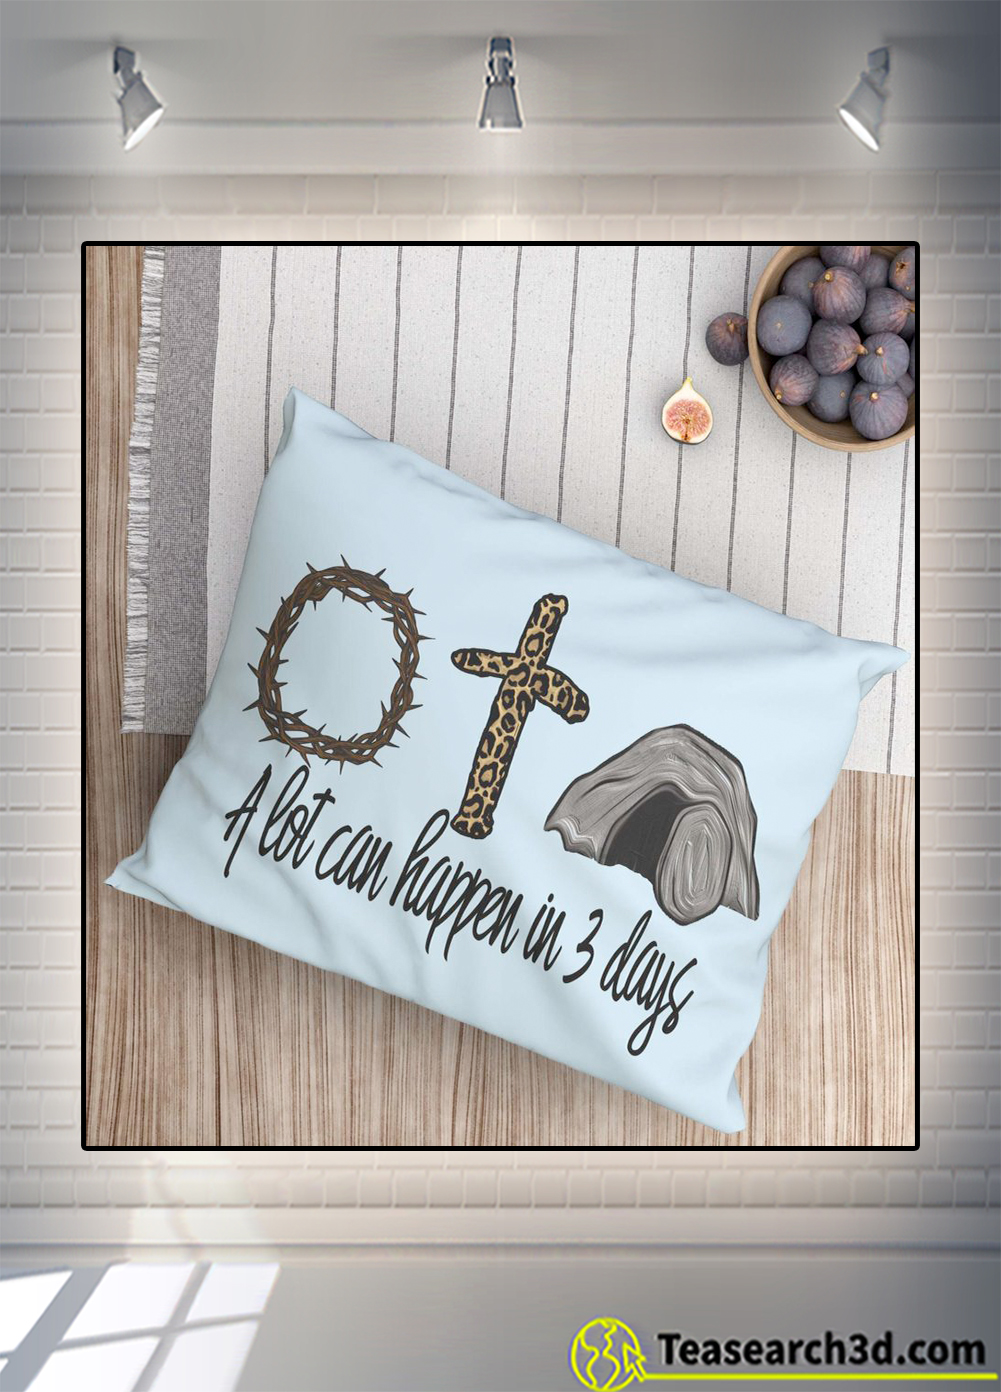 A lot can happen in 3 days jesus easter pillow